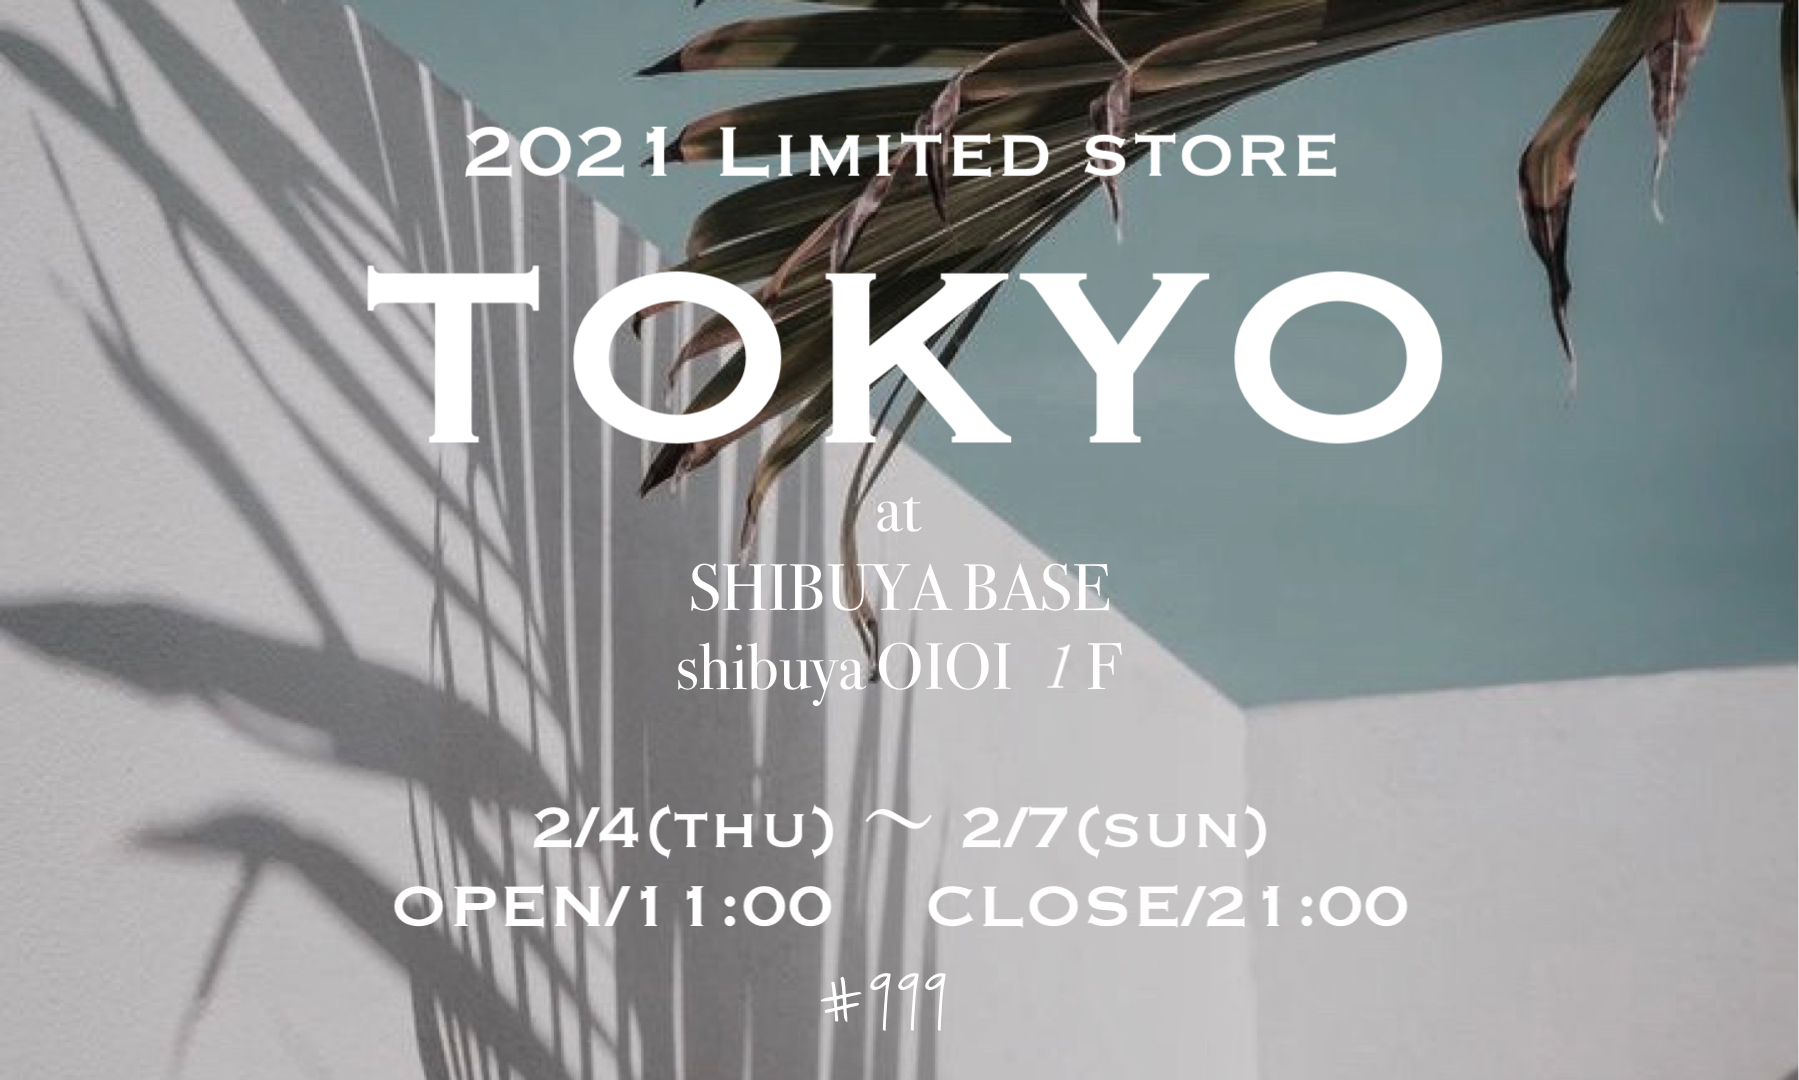 - 2021 LIMITED STORE  pop up ご案内 -